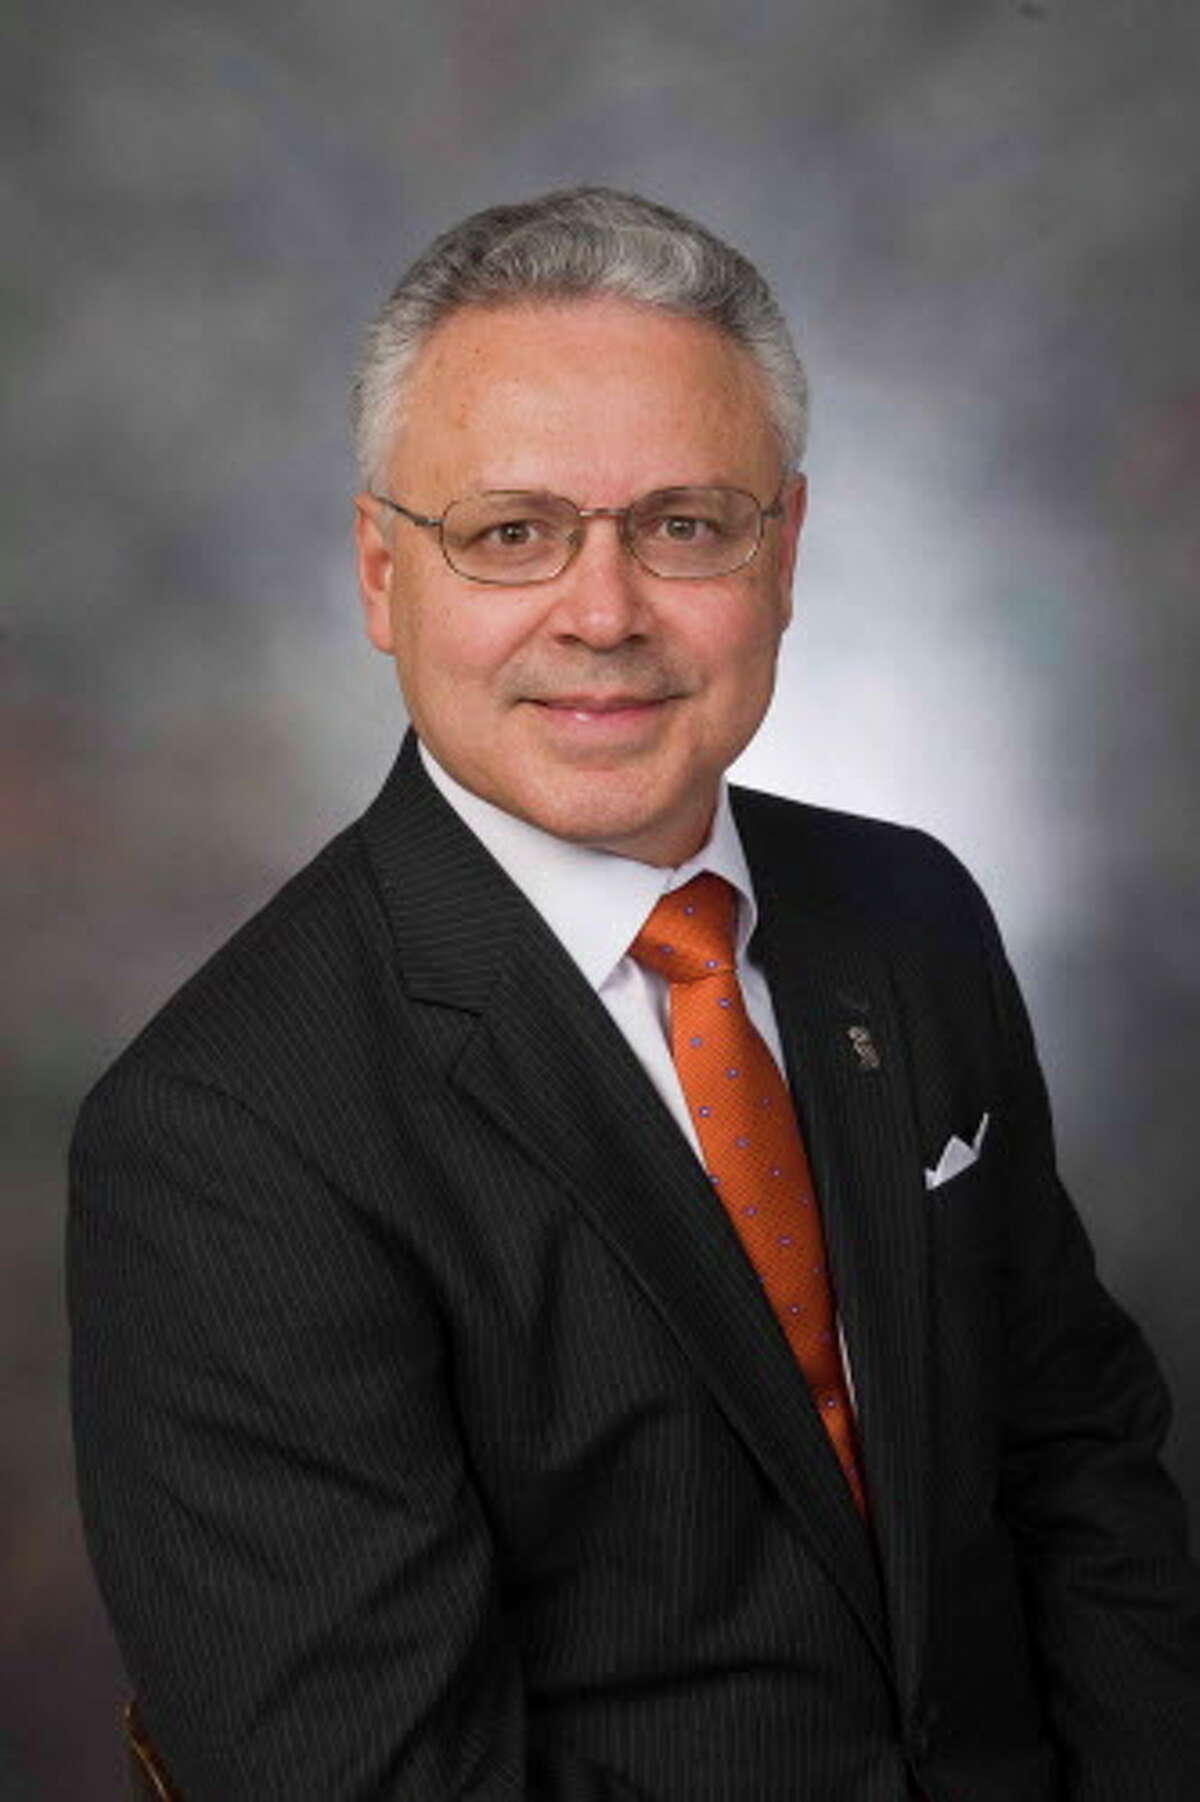 David D. Medina is director of Multicultural Community Relations in Public Affairs at Rice University.